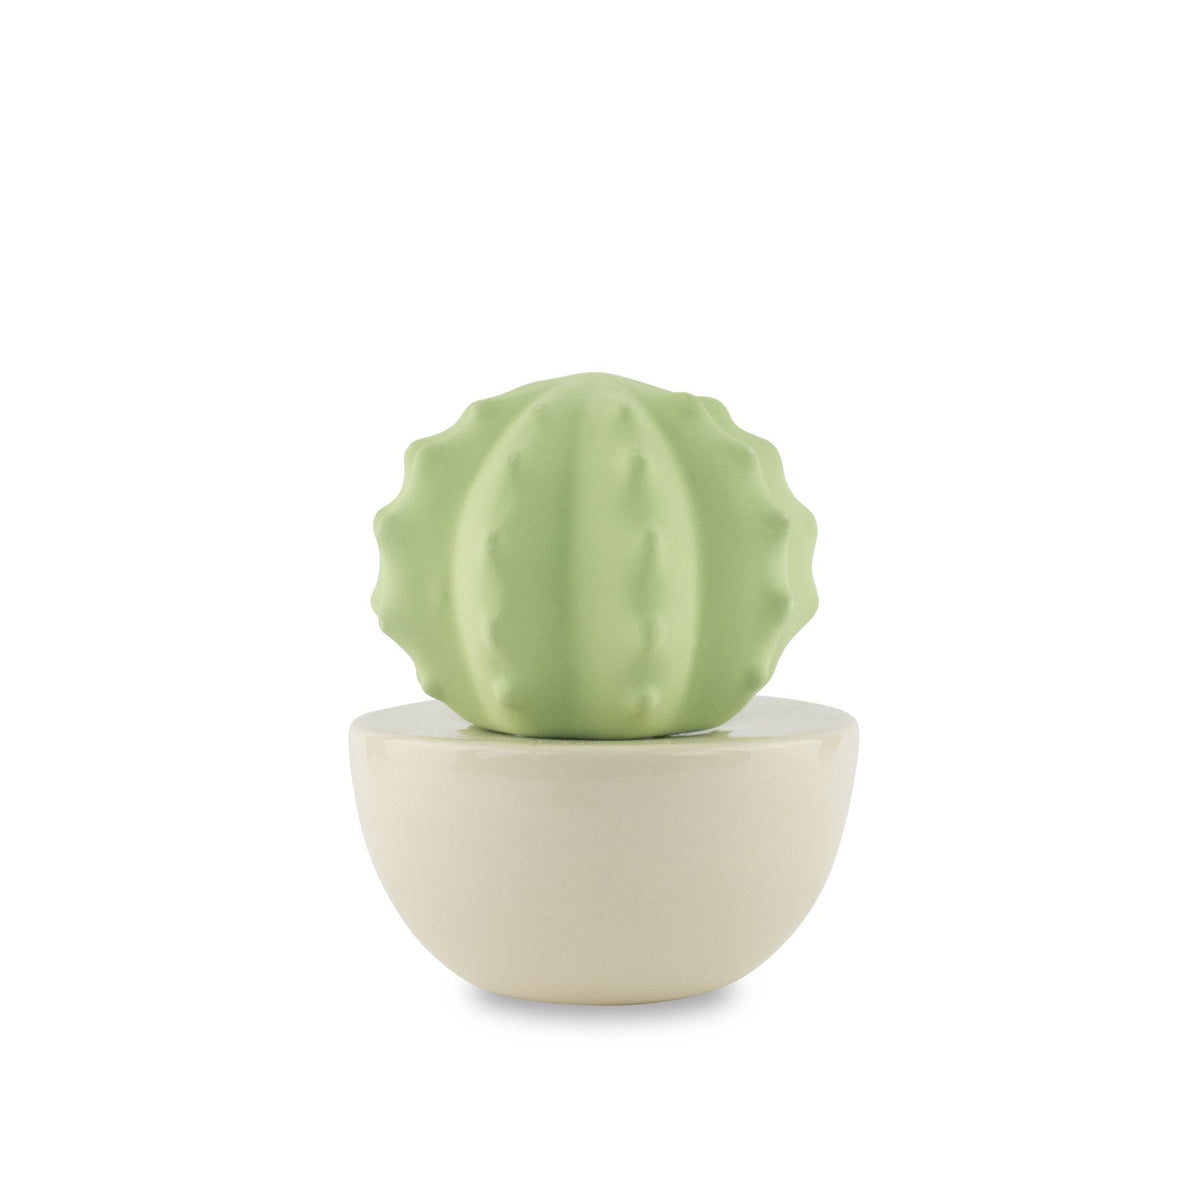 Hysses Home Scents Cutie Scenting Clay Diffuser Cactus, Lemongrass 60ml